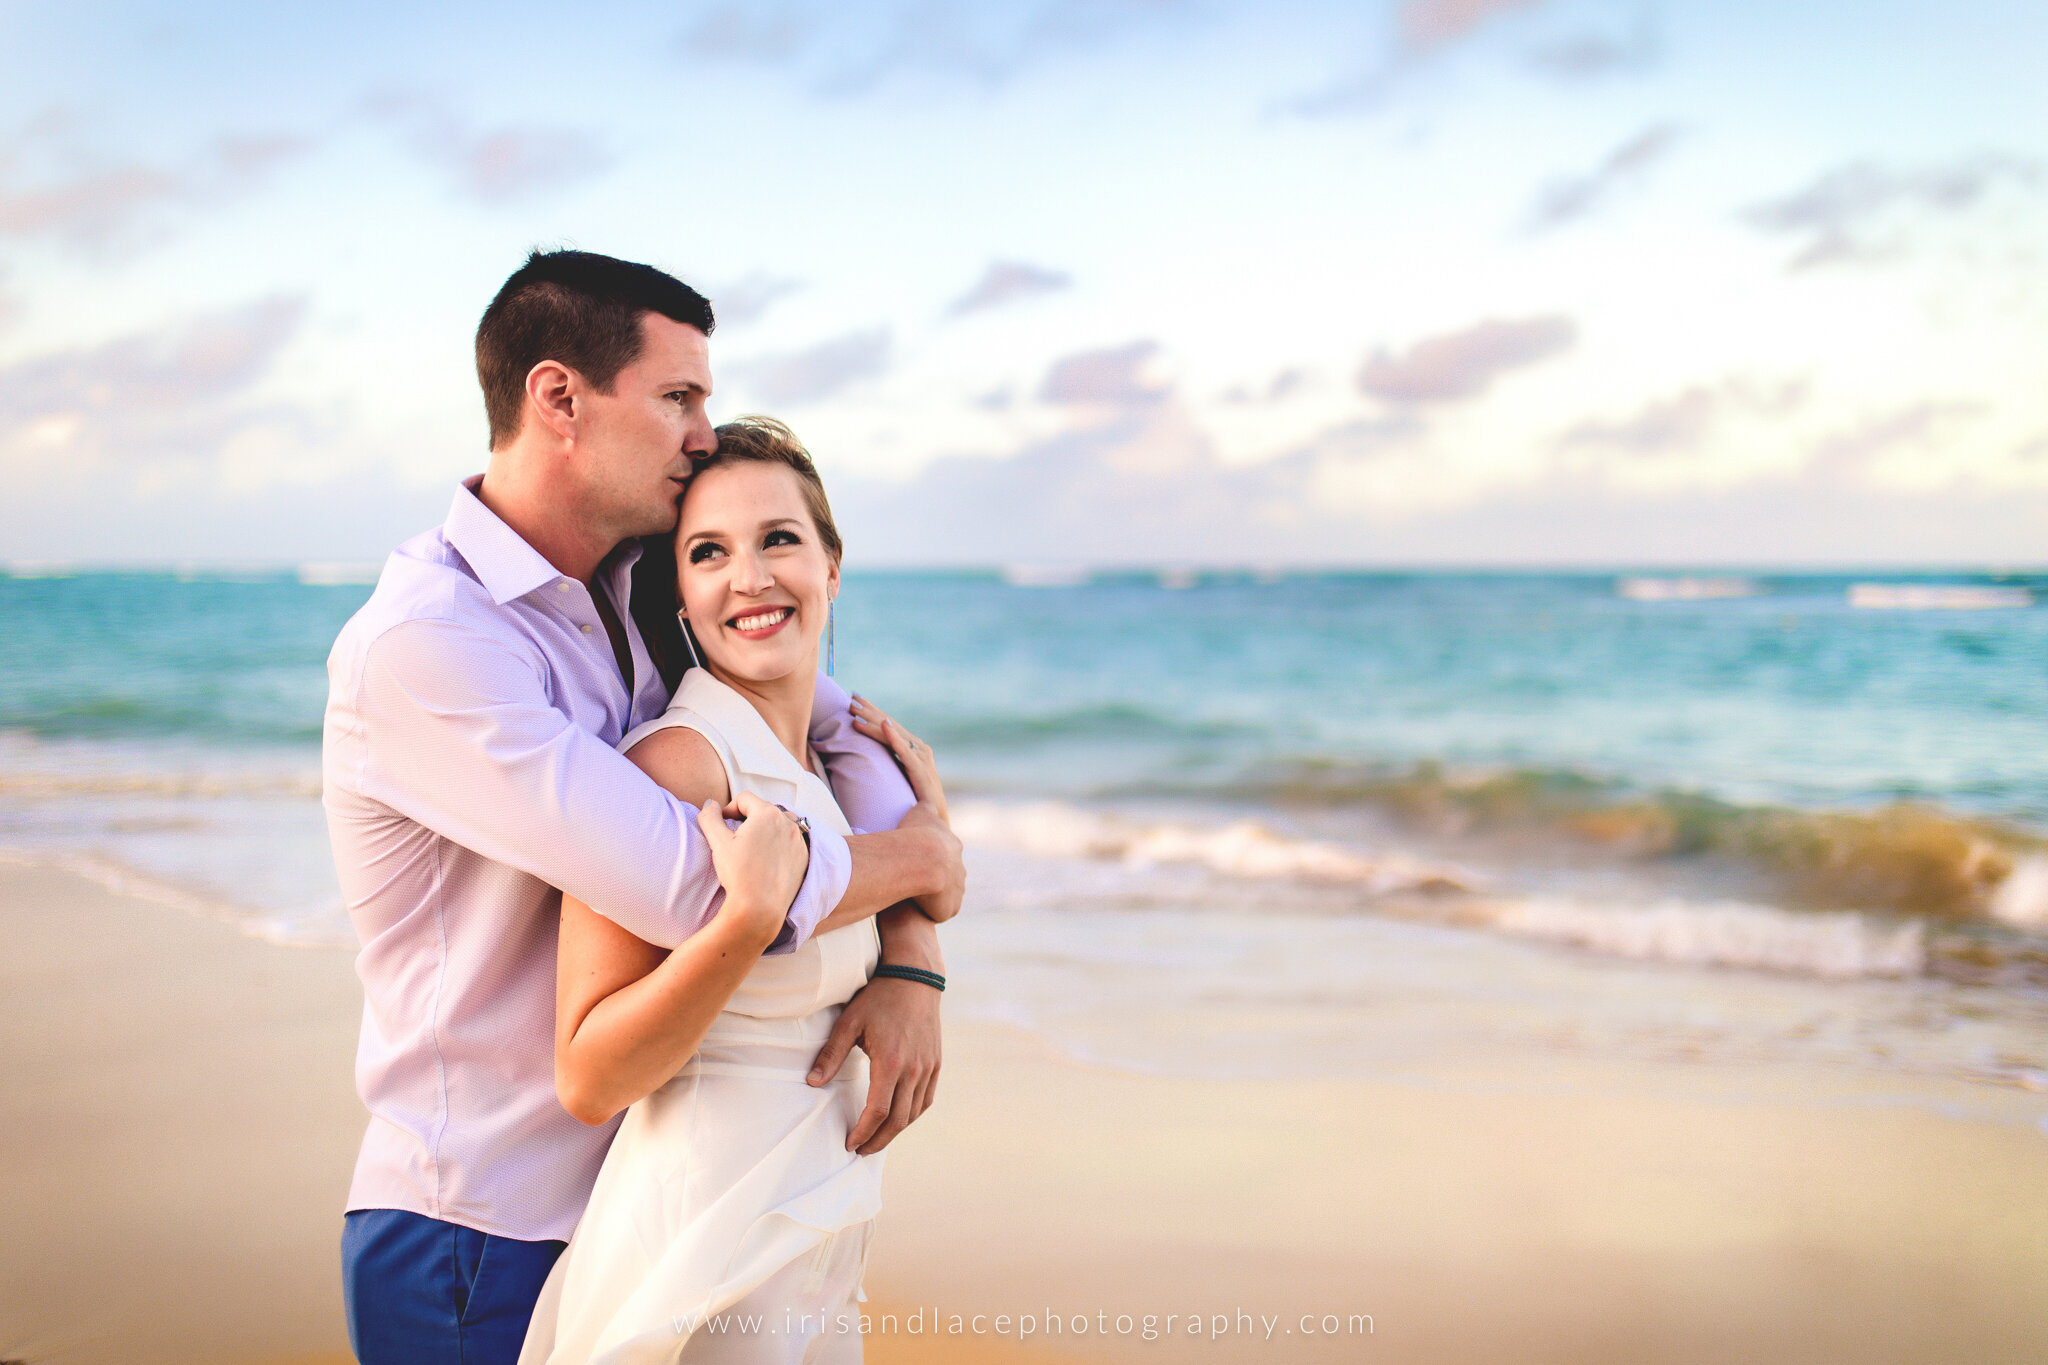 Tropical Engagement Photos  |  Iris and Lace Photography 